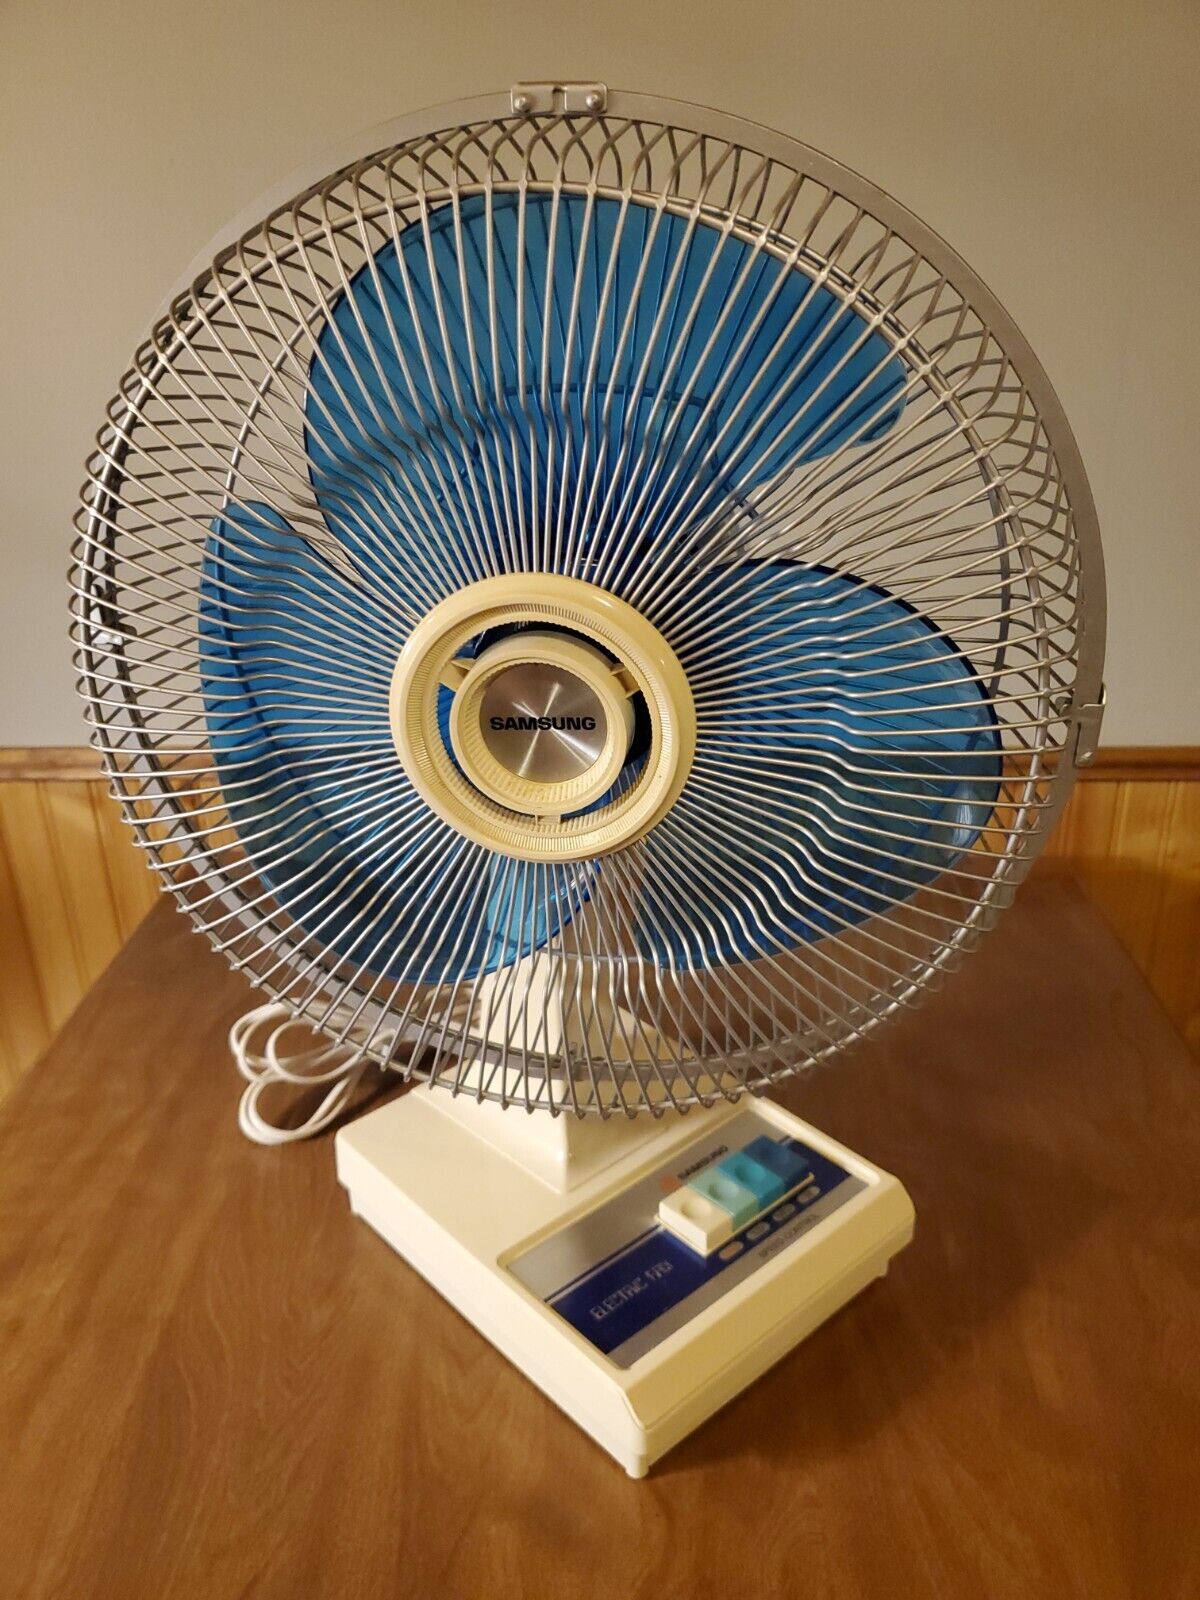  Vintage SAMSUNG Electric 3 Speed Tabletop Oscillating Fan SF-1200A BLUE Blades